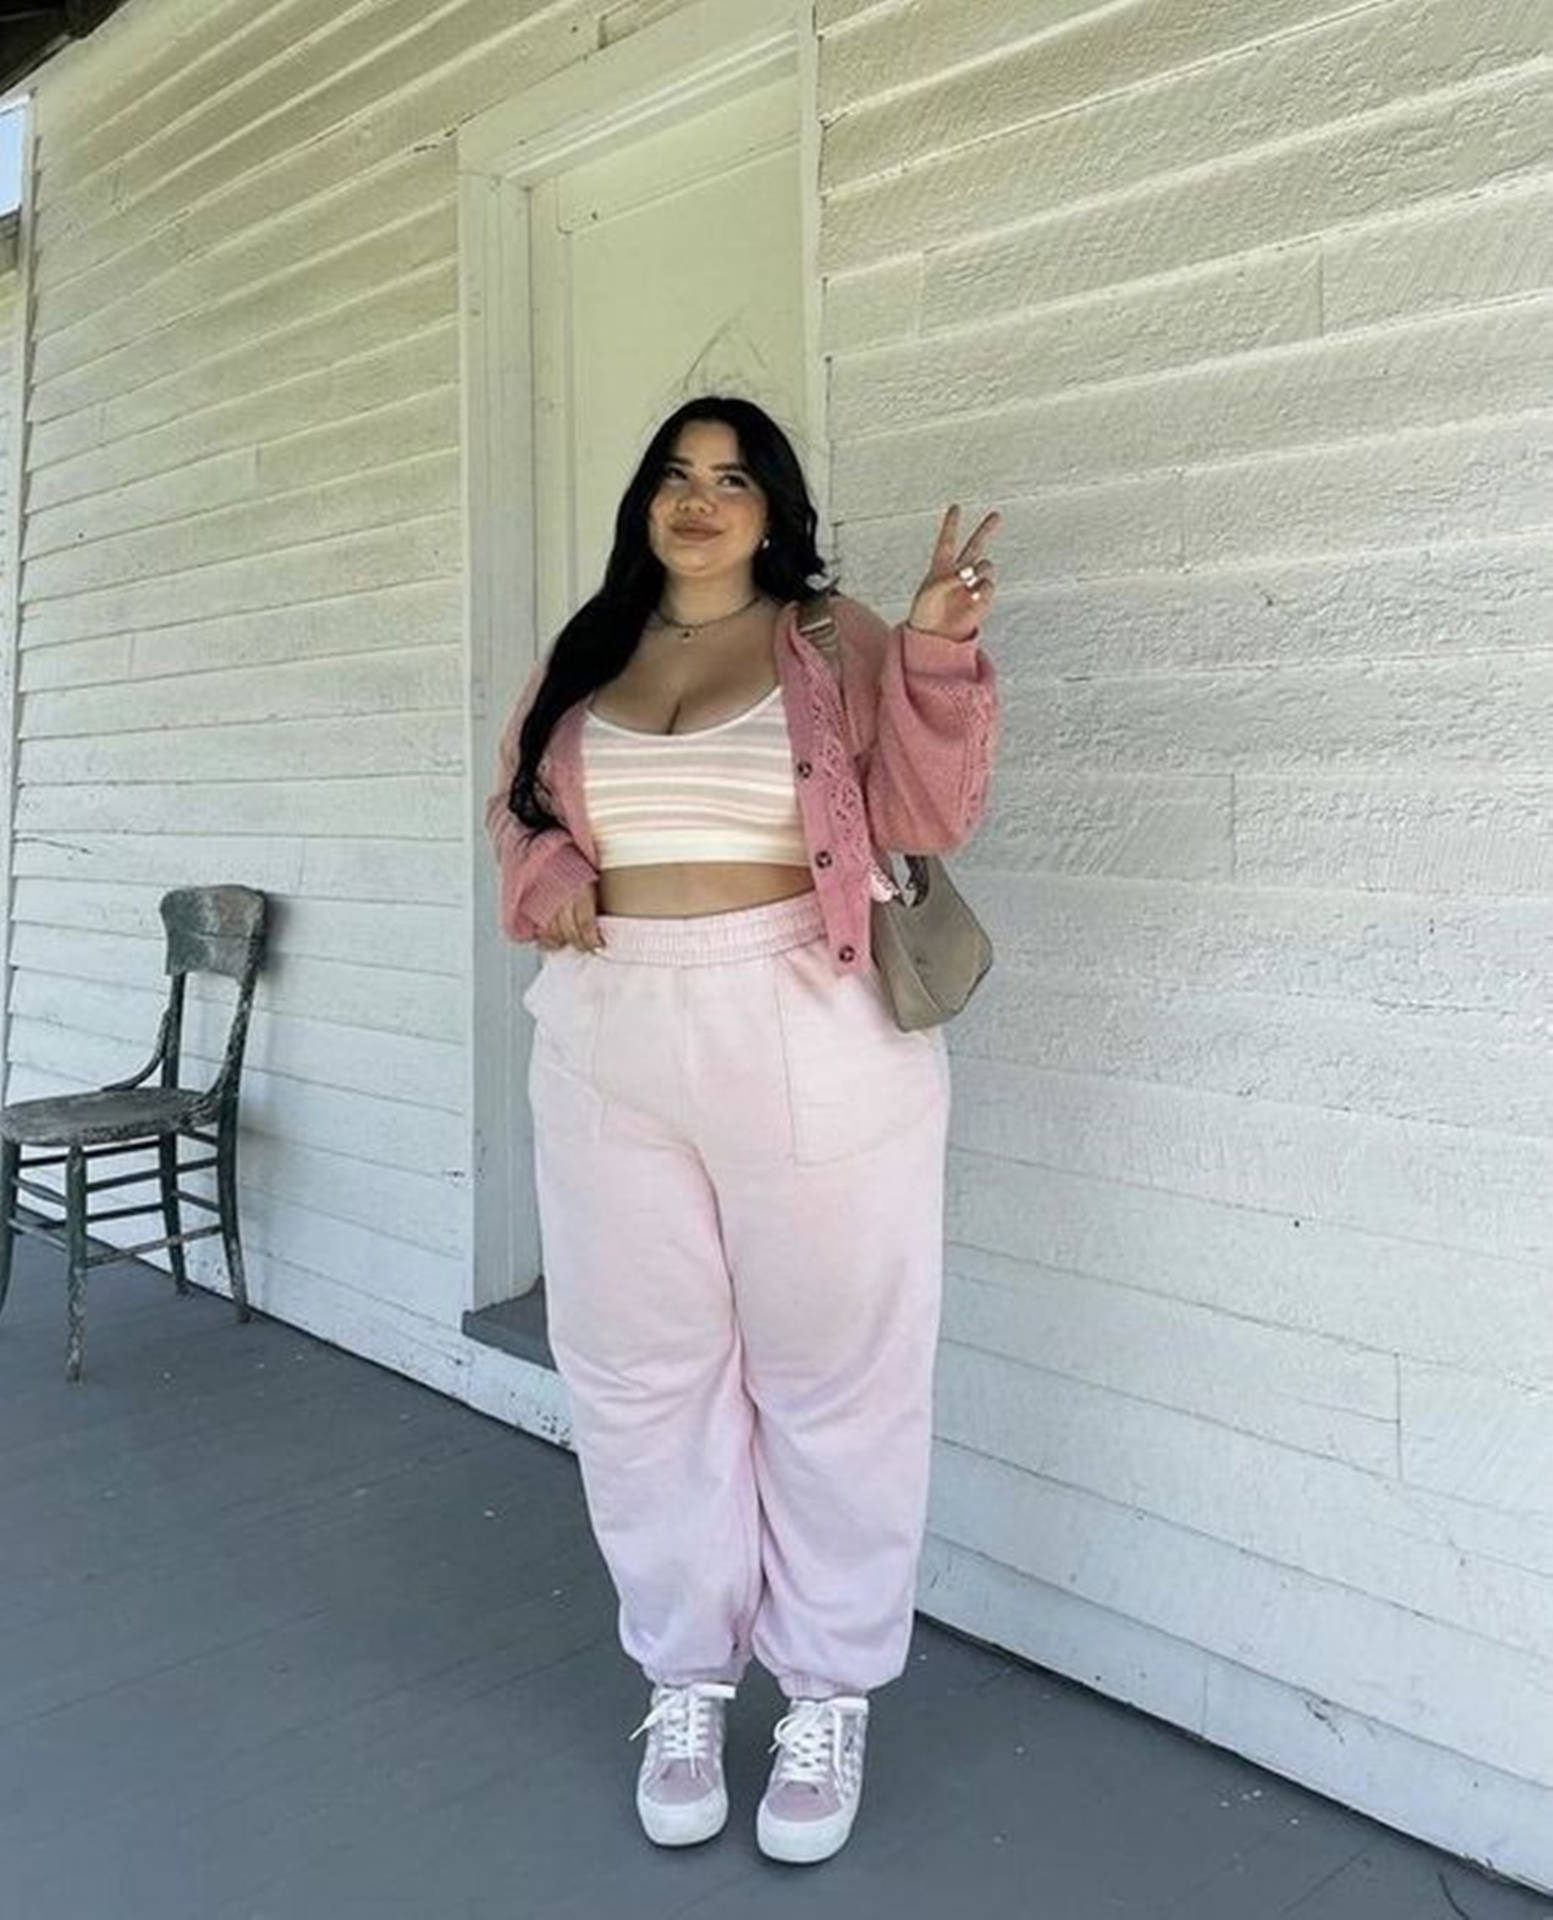 Chubby Teen Pink Outfit Wallpaper